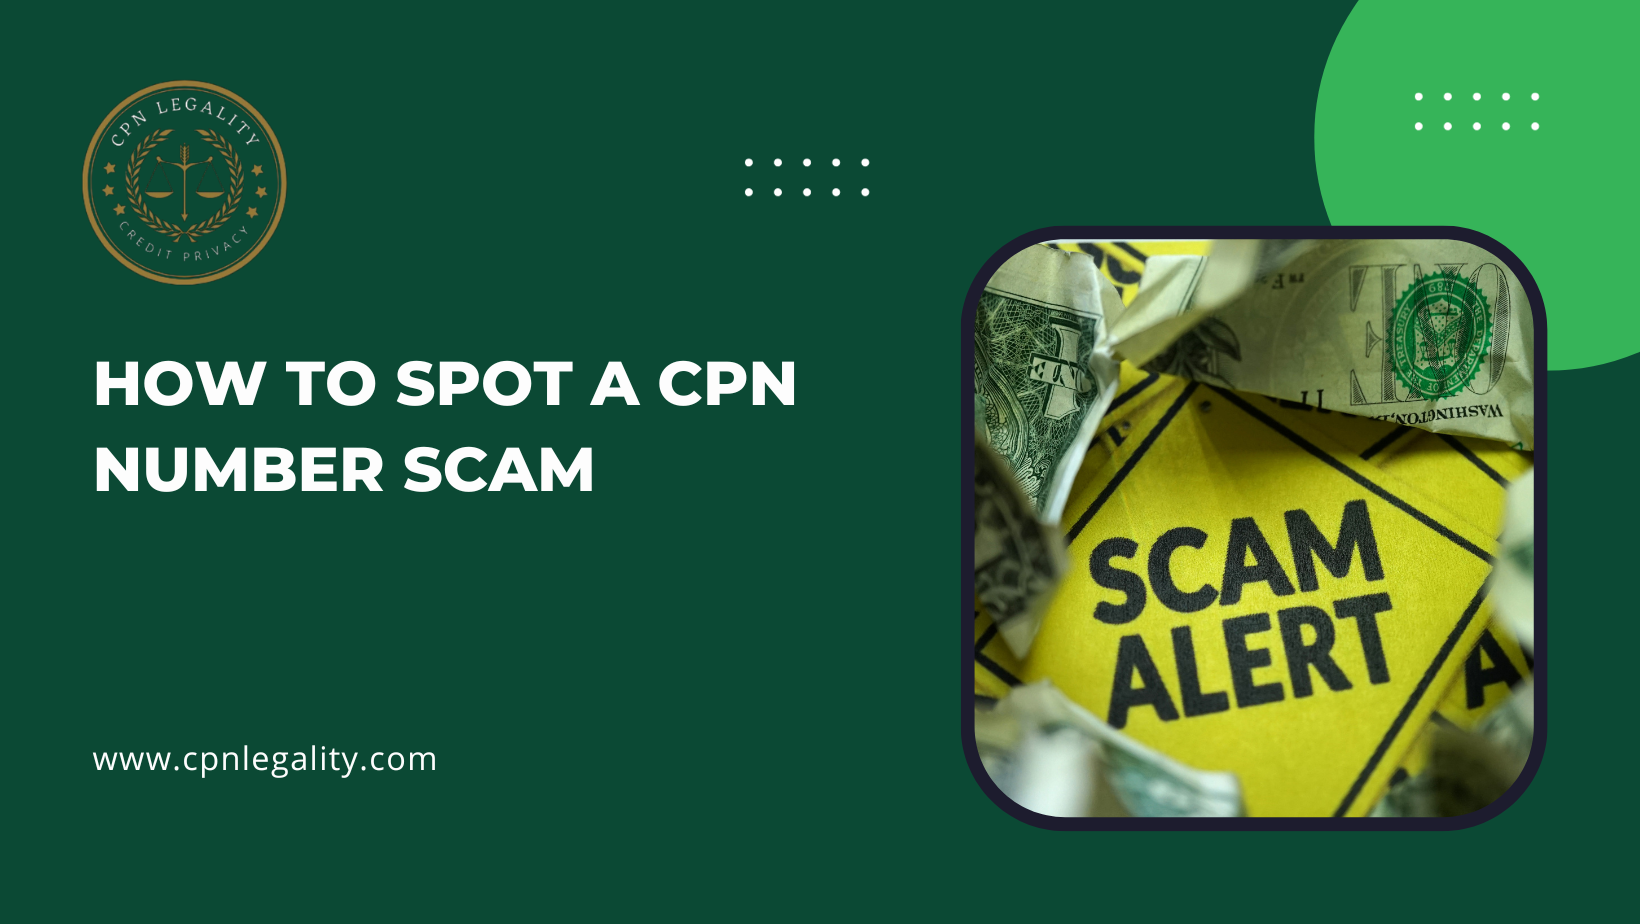 How to Spot a CPN Number Scam